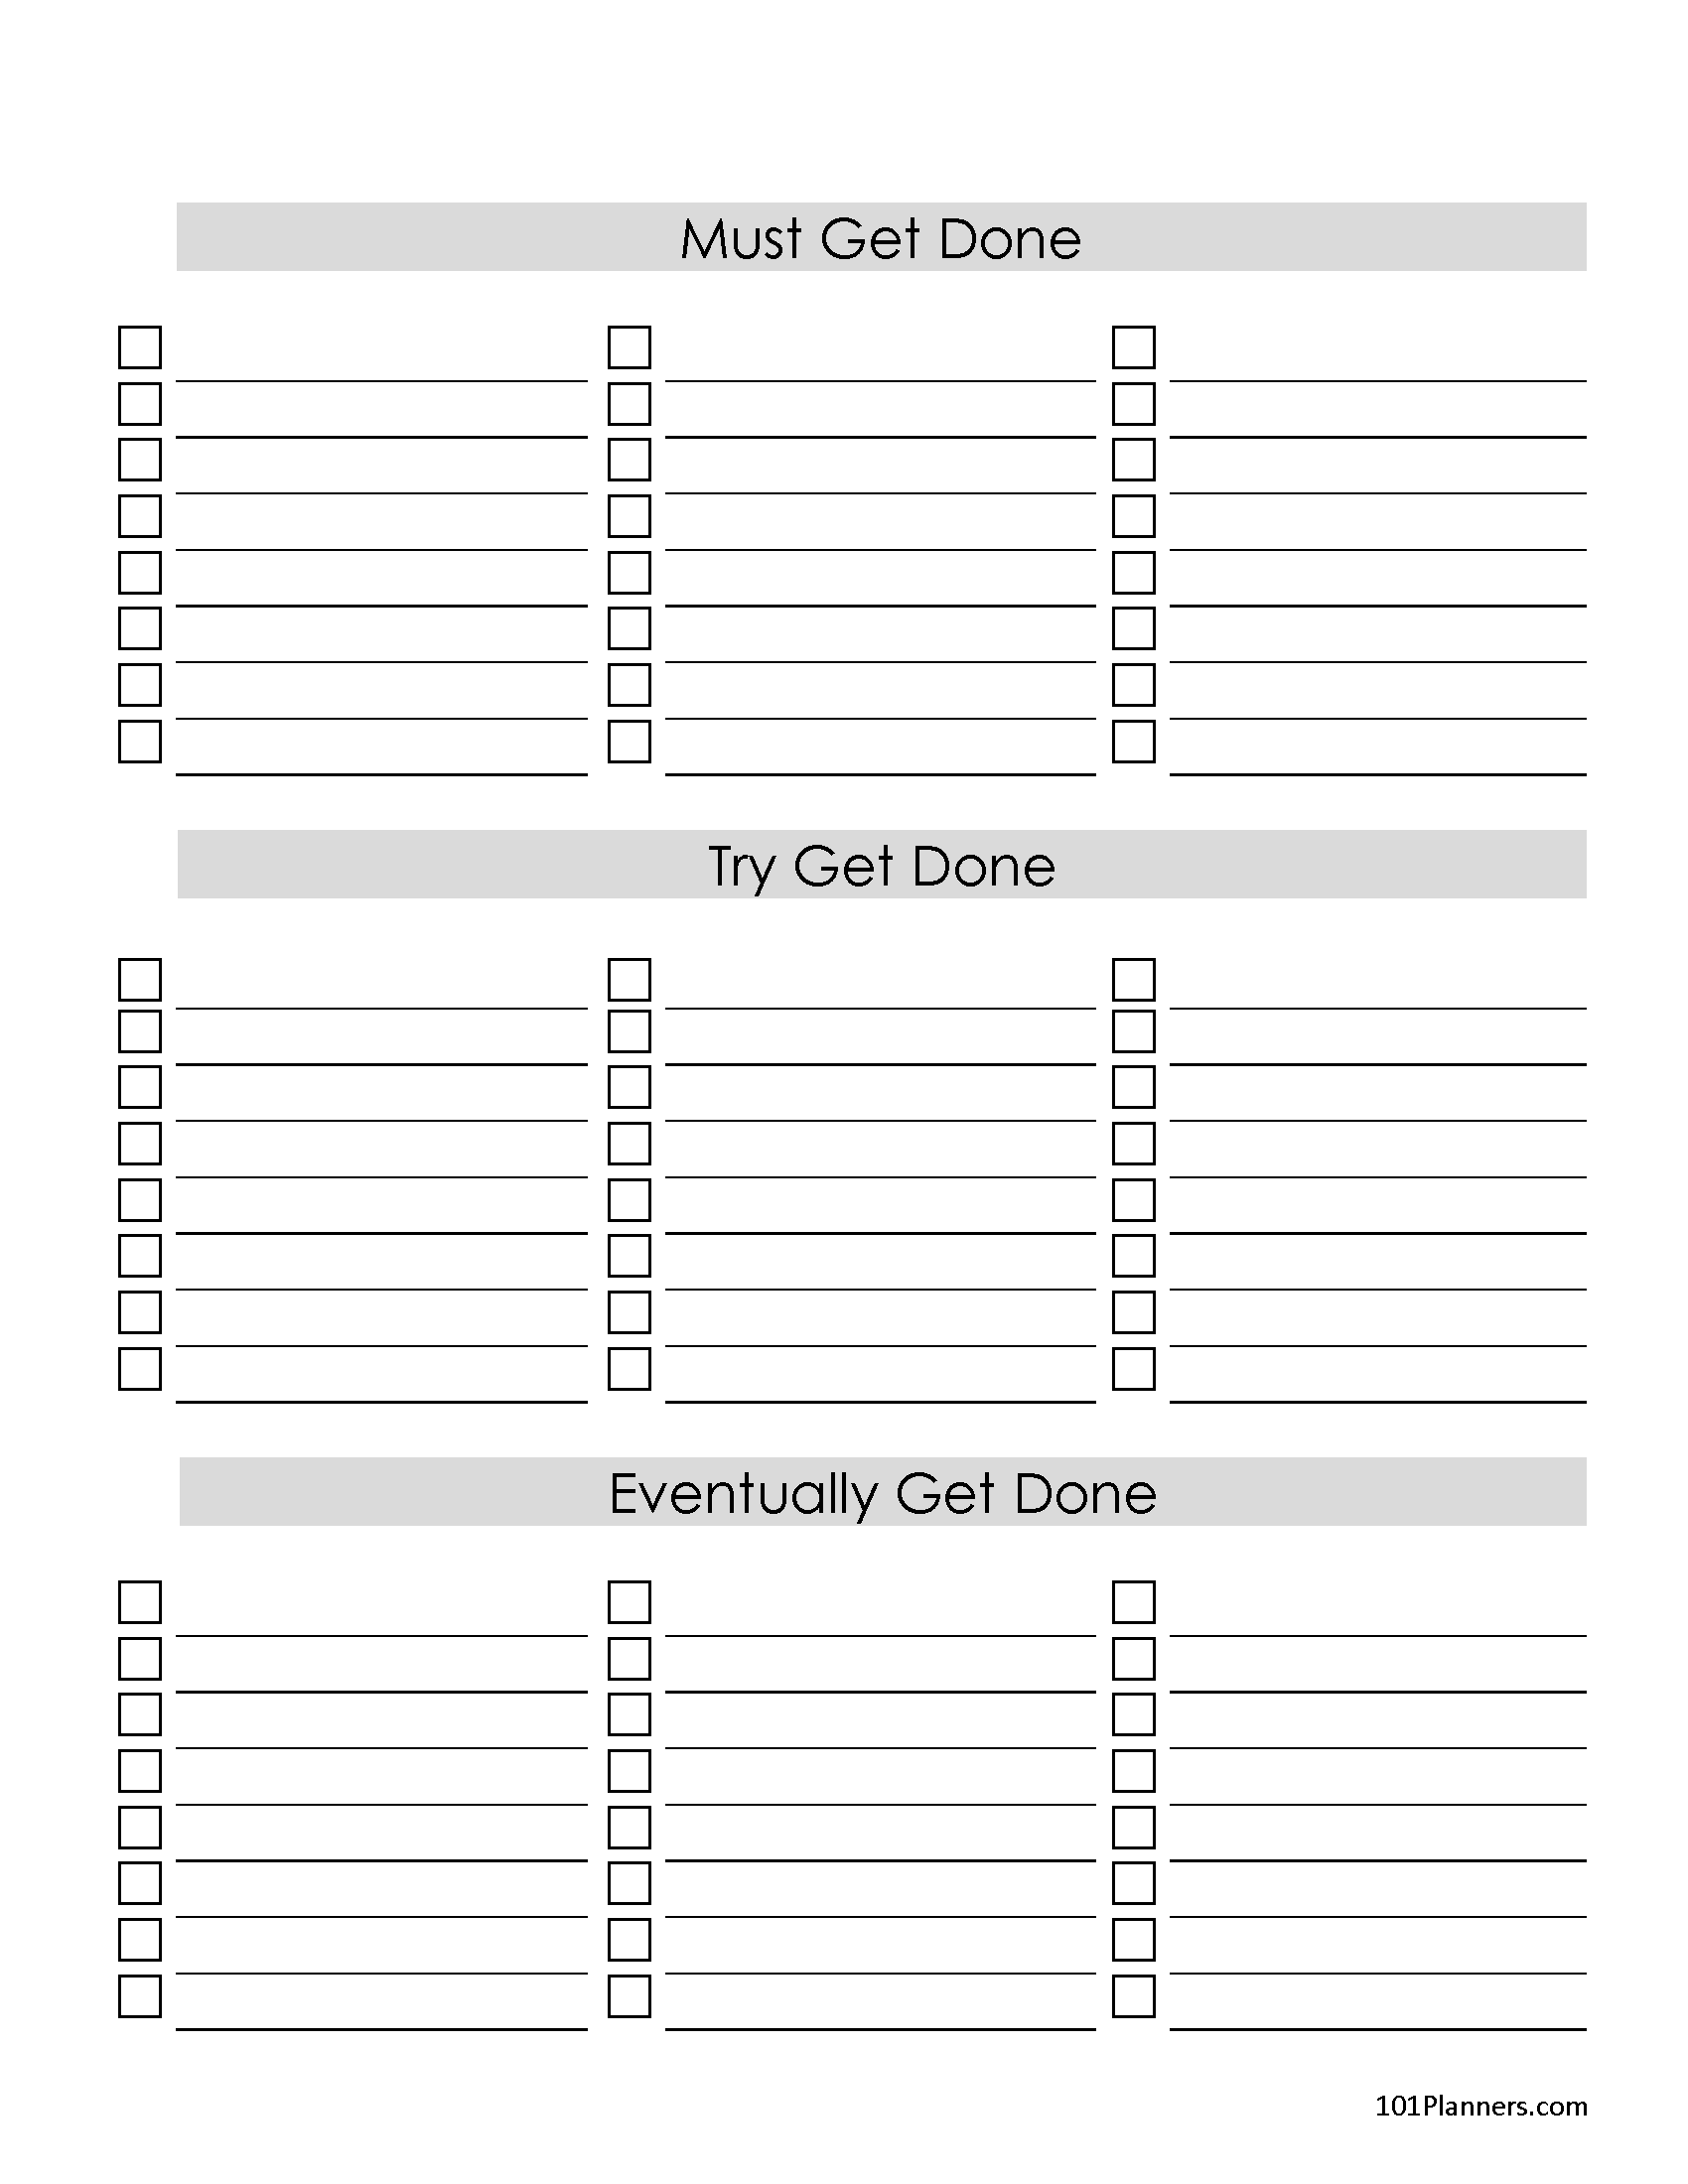 FREE Checklist Template Word With Blank Checklist Template Word